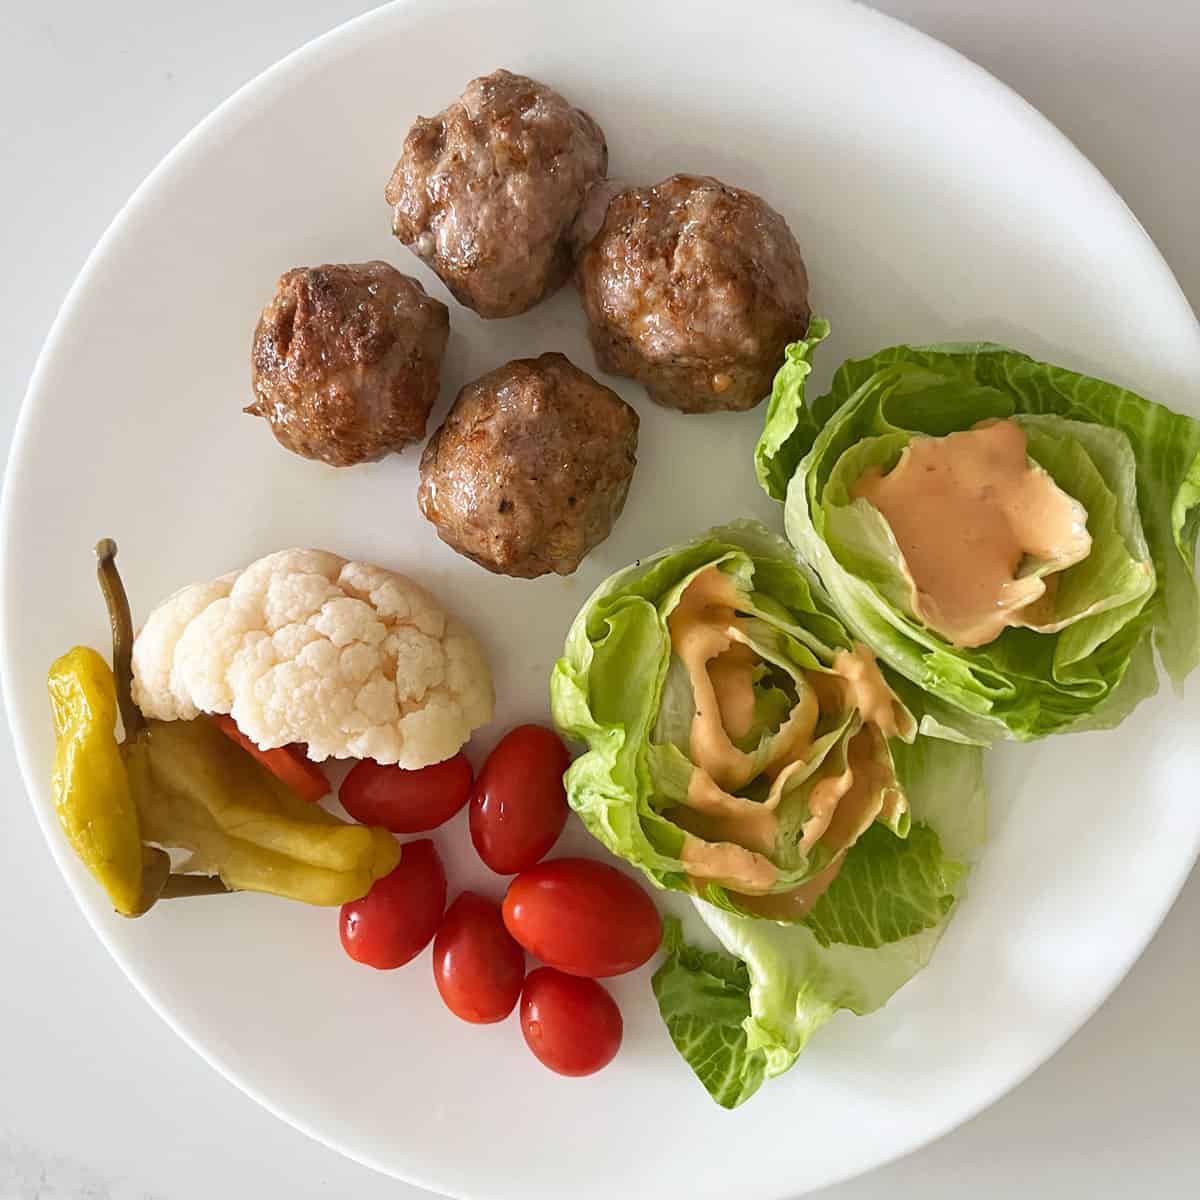 The meatballs are served with veggies and pickles.